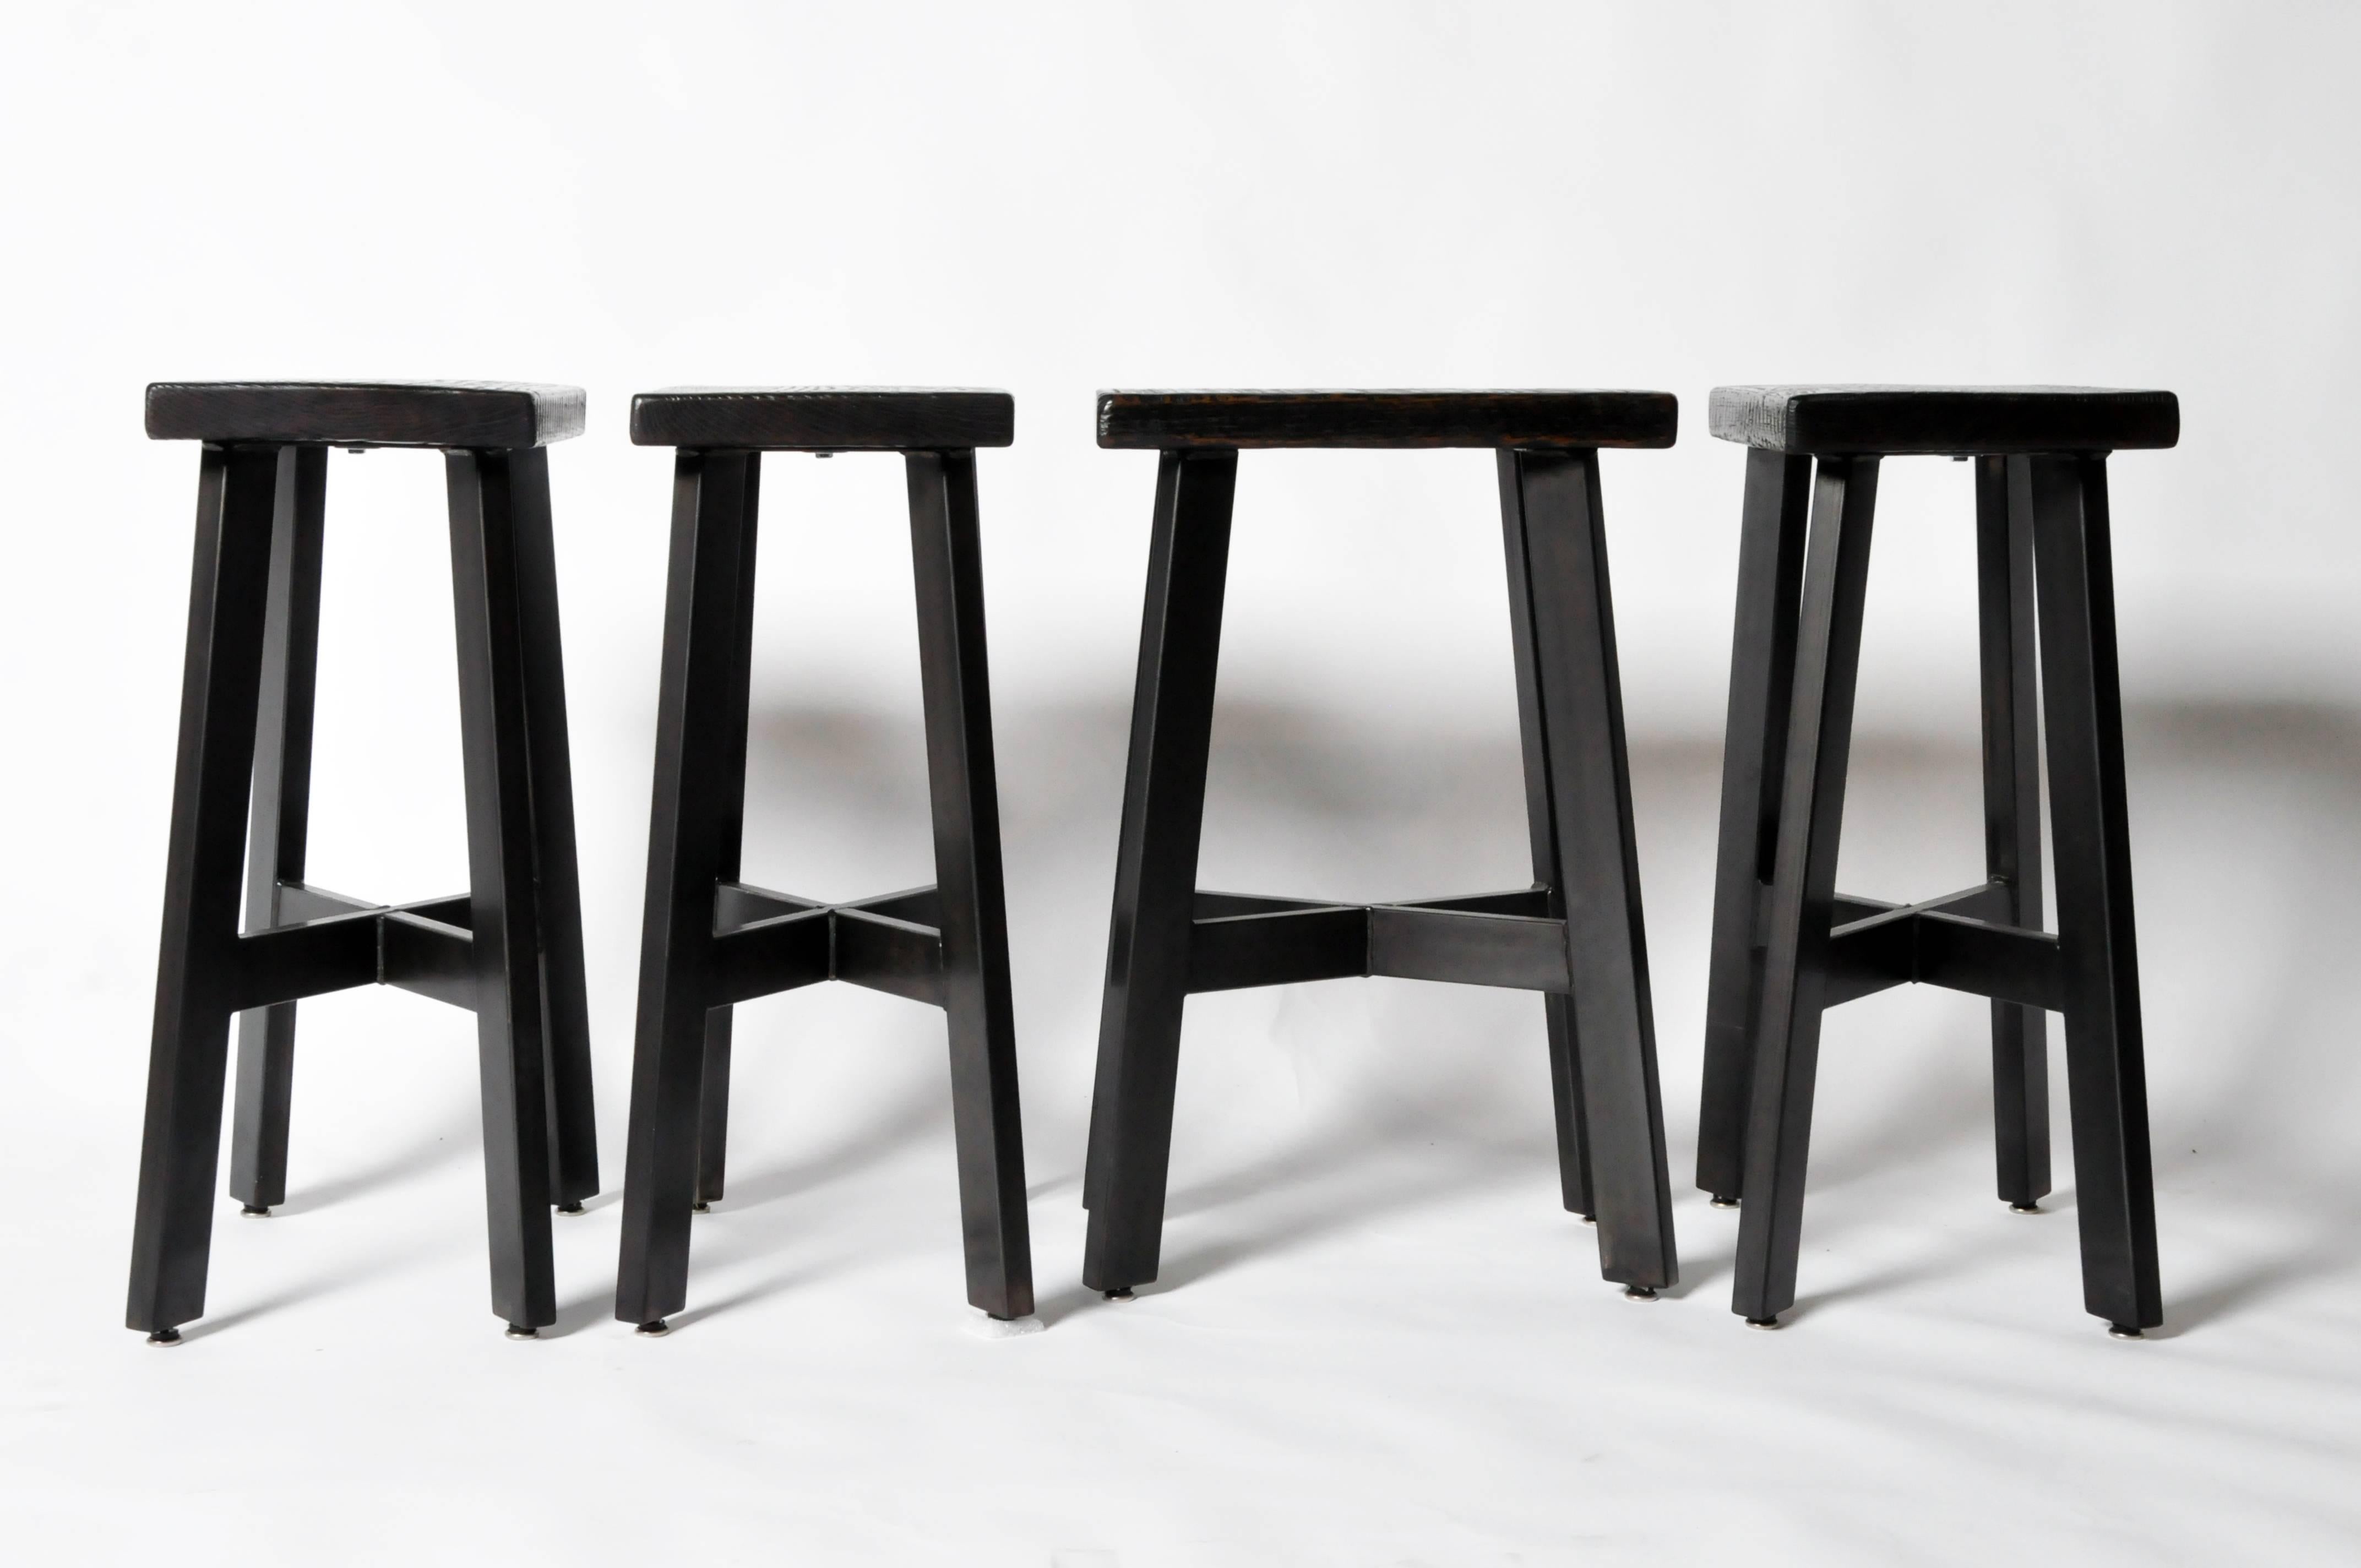 These counter stools are made with a steel leg base with a wooden seat. They are ideal seating for bar counters.